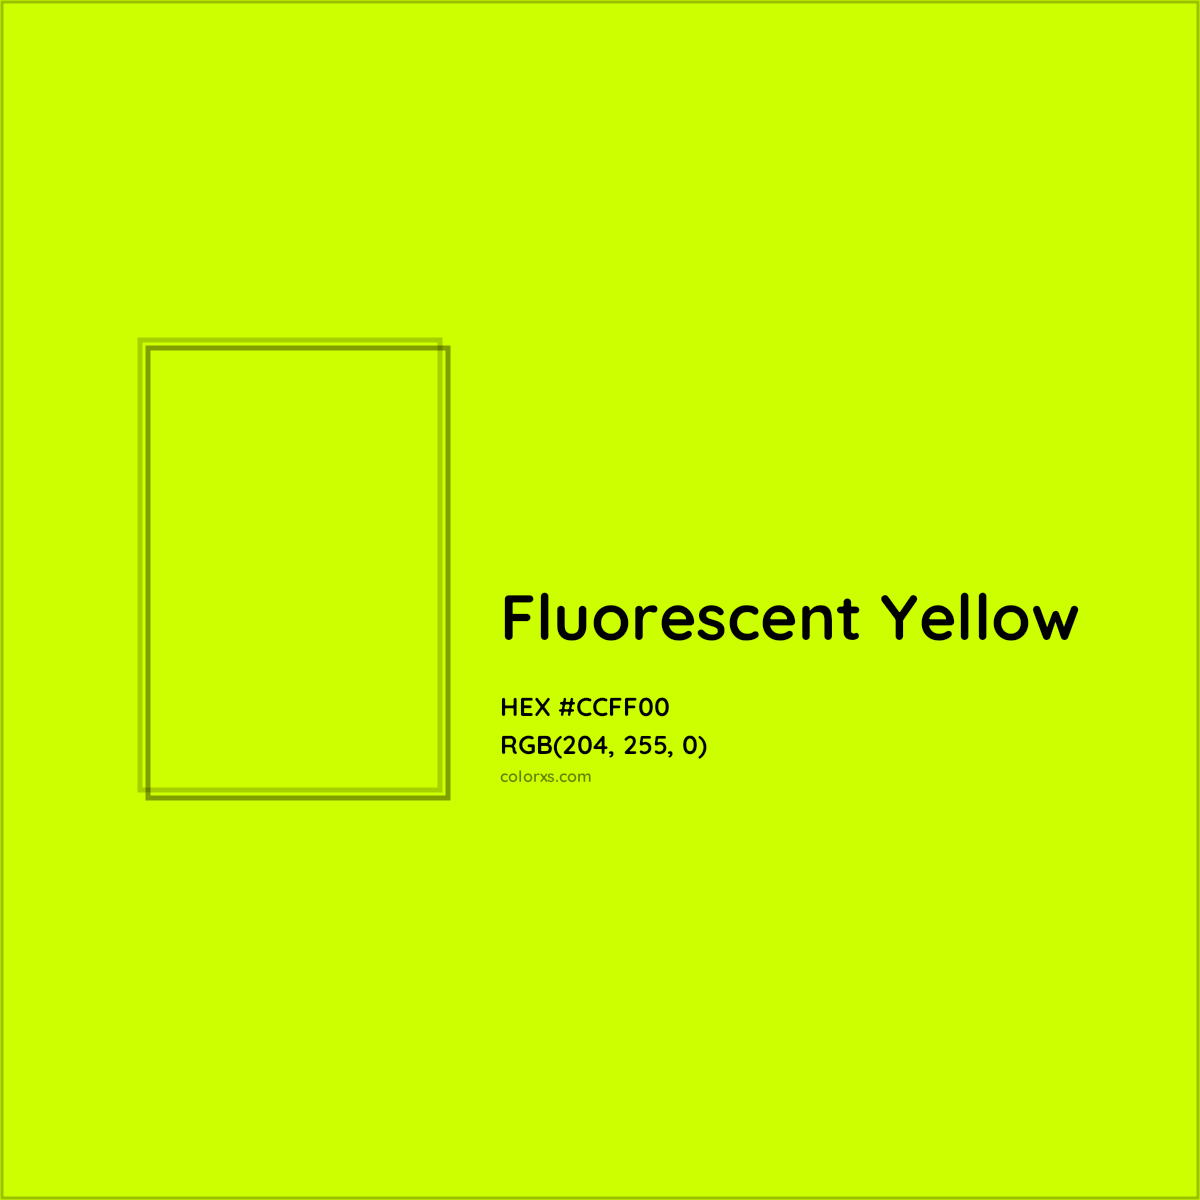 HEX #CCFF00 Fluorescent Yellow Color - Color Code